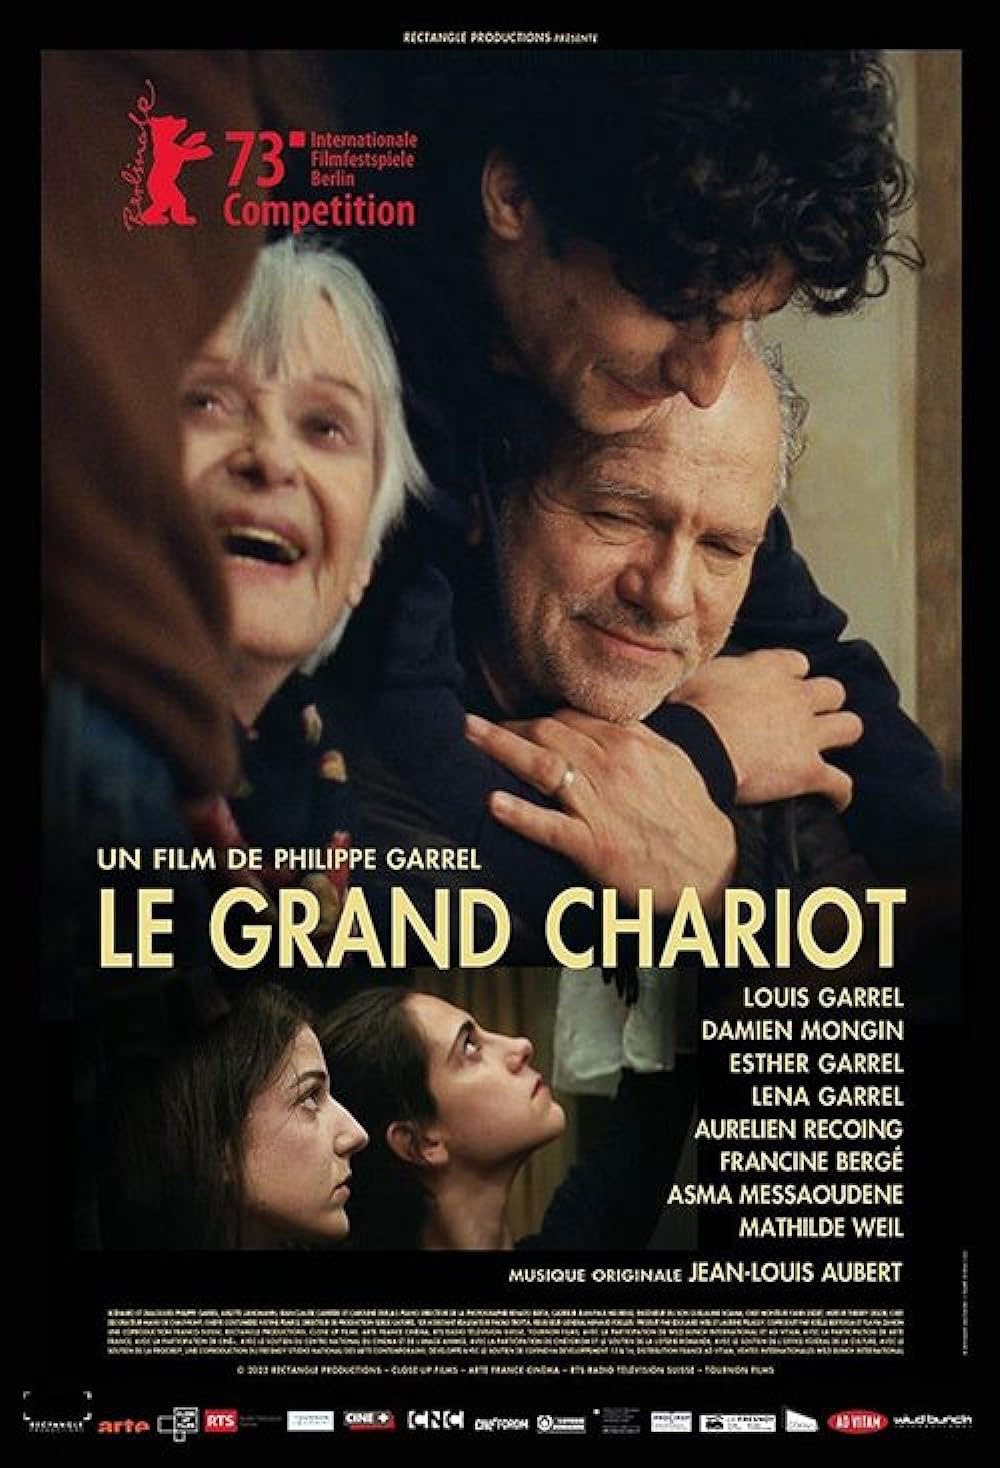 The Grand Chariot film poster